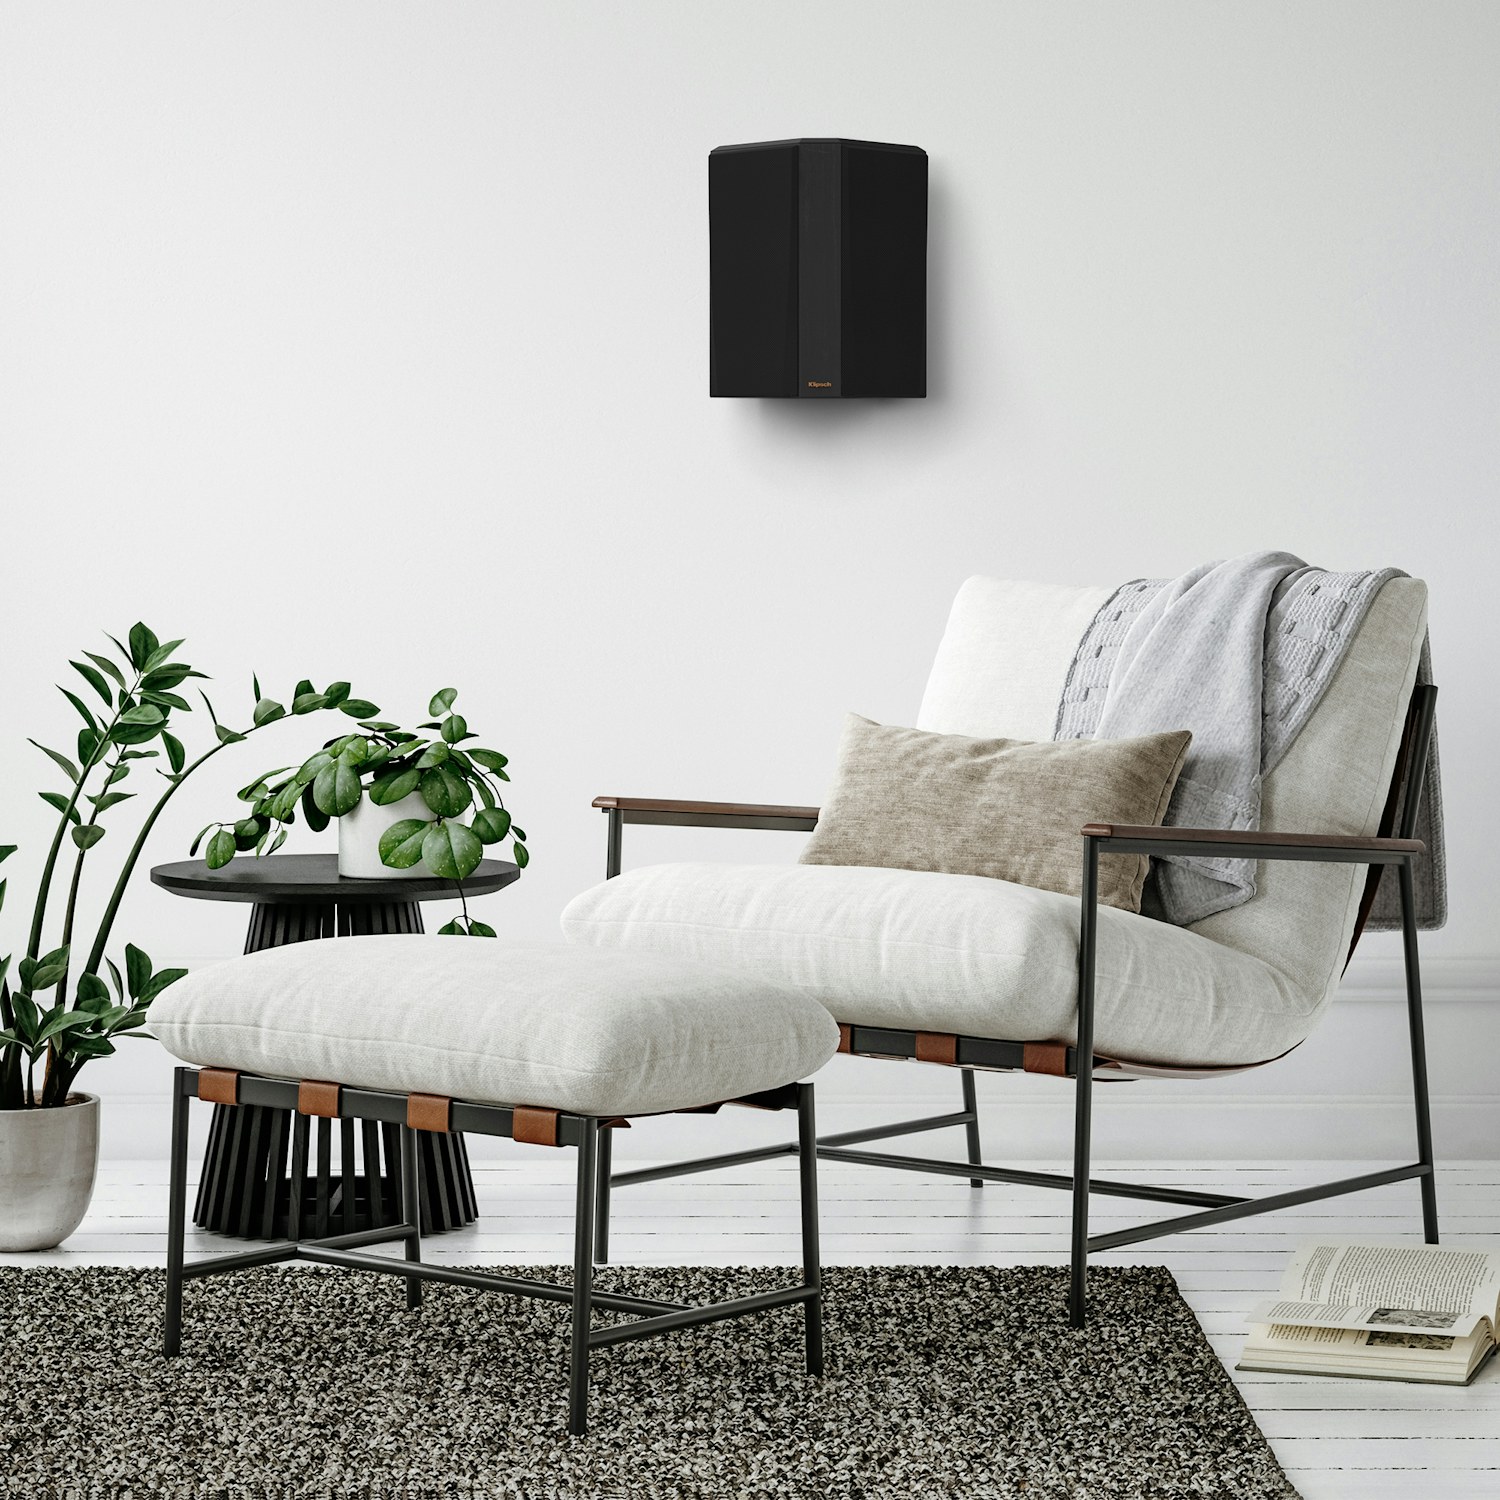 RP 502 S II surround speaker in black finish hung on a greyish wall near a chair